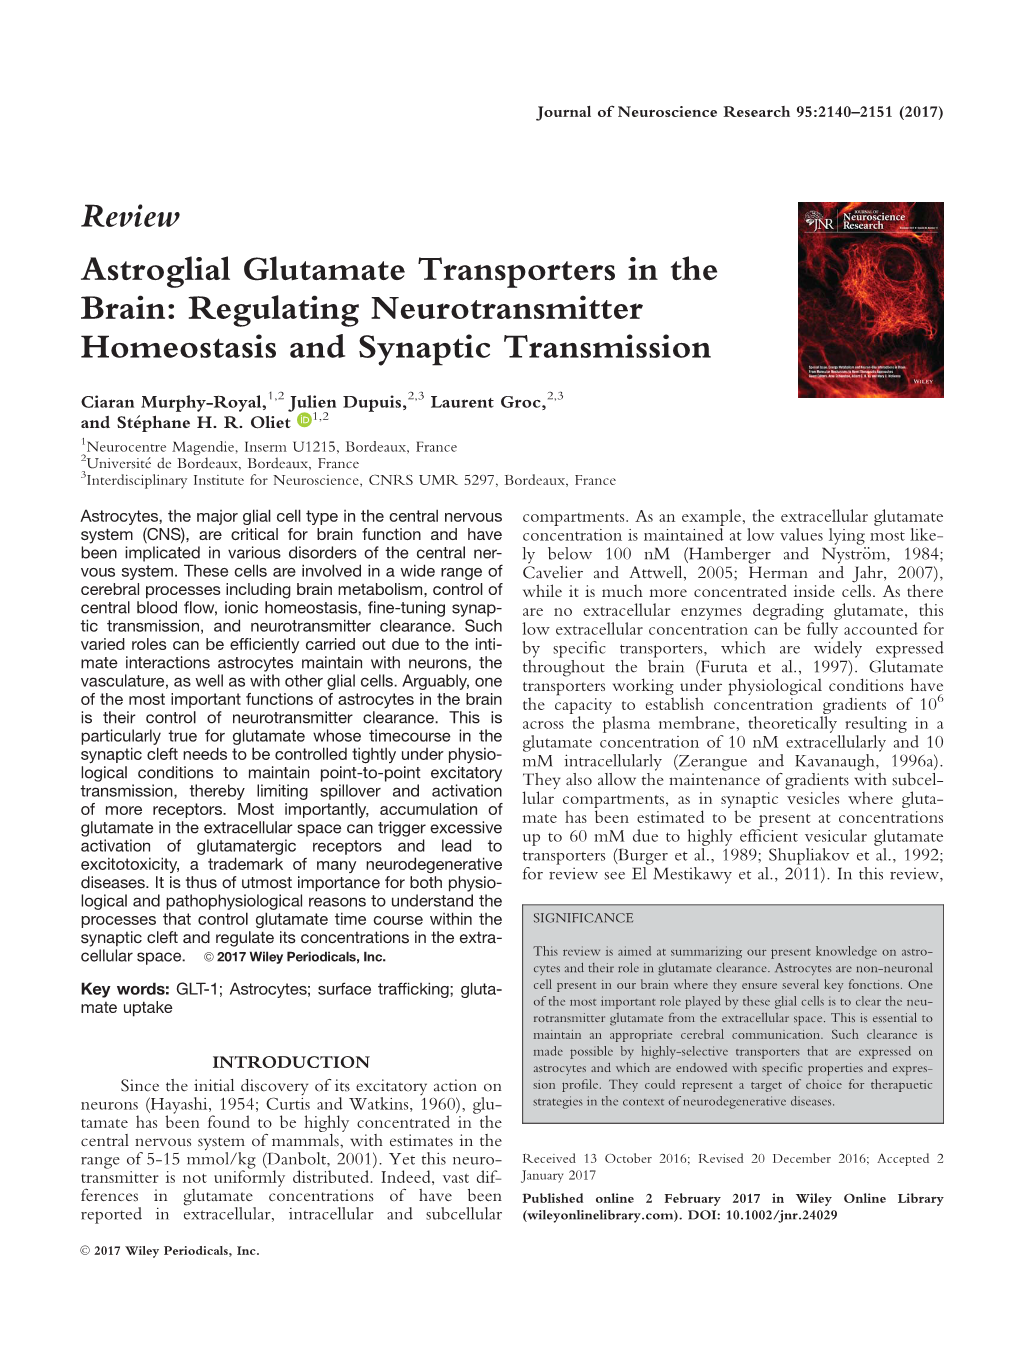 Astroglial Glutamate Transporters in the Brain: Regulating Neurotransmitter Homeostasis and Synaptic Transmission